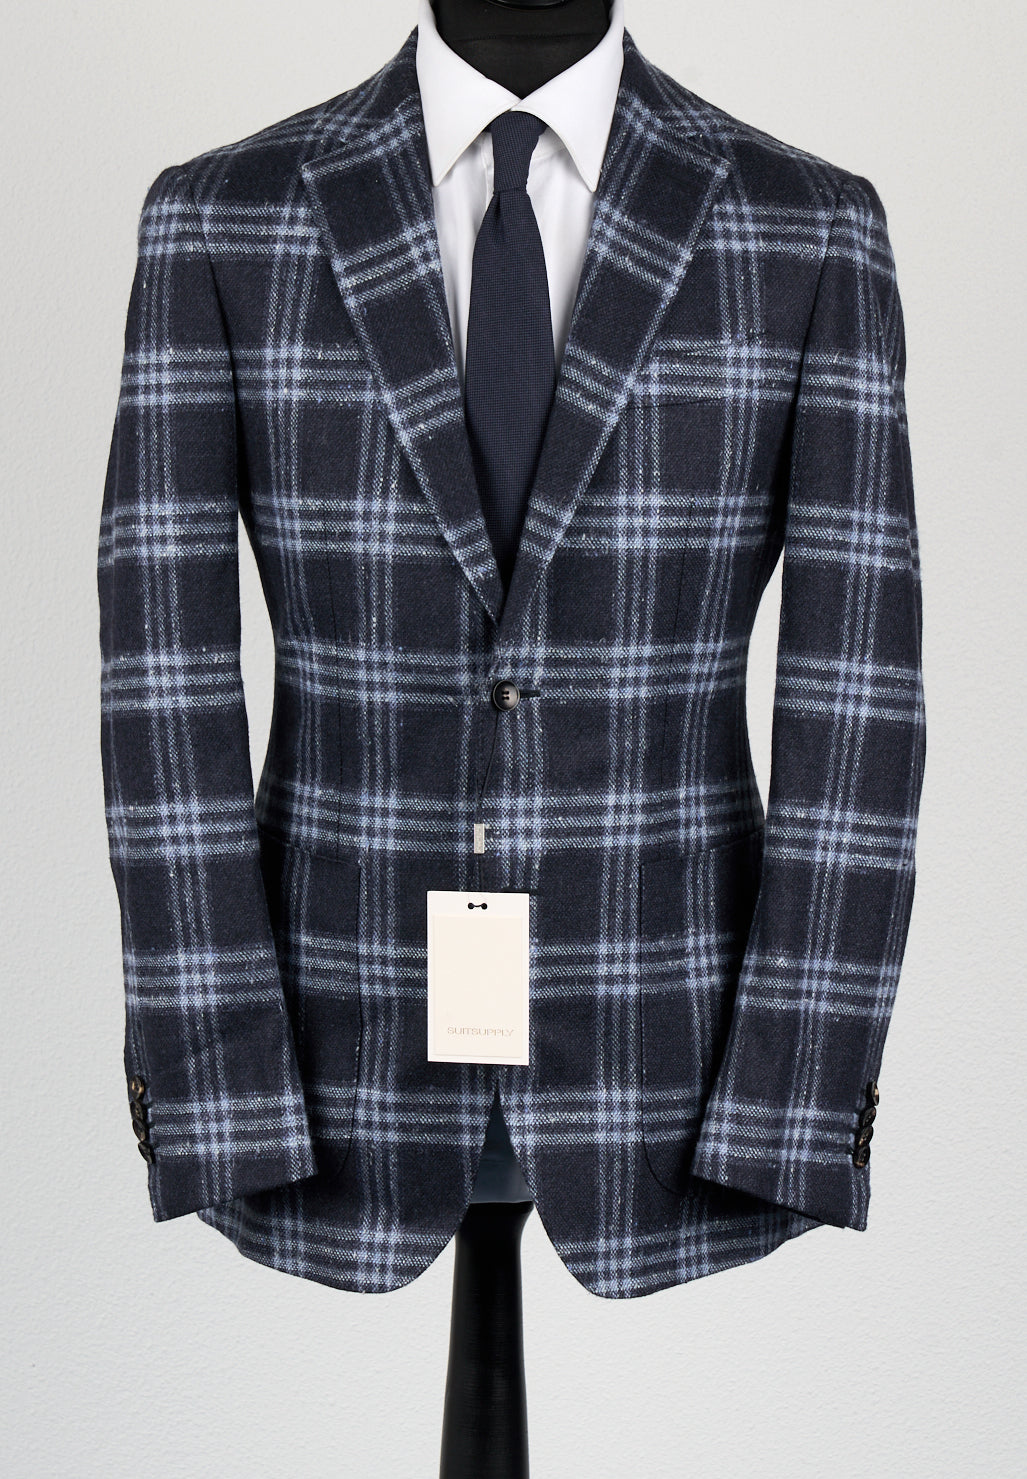 New Suitsupply Havana Navy Plaid Wool, Mohair, Silk and Cashmere Blazer - Size 38R